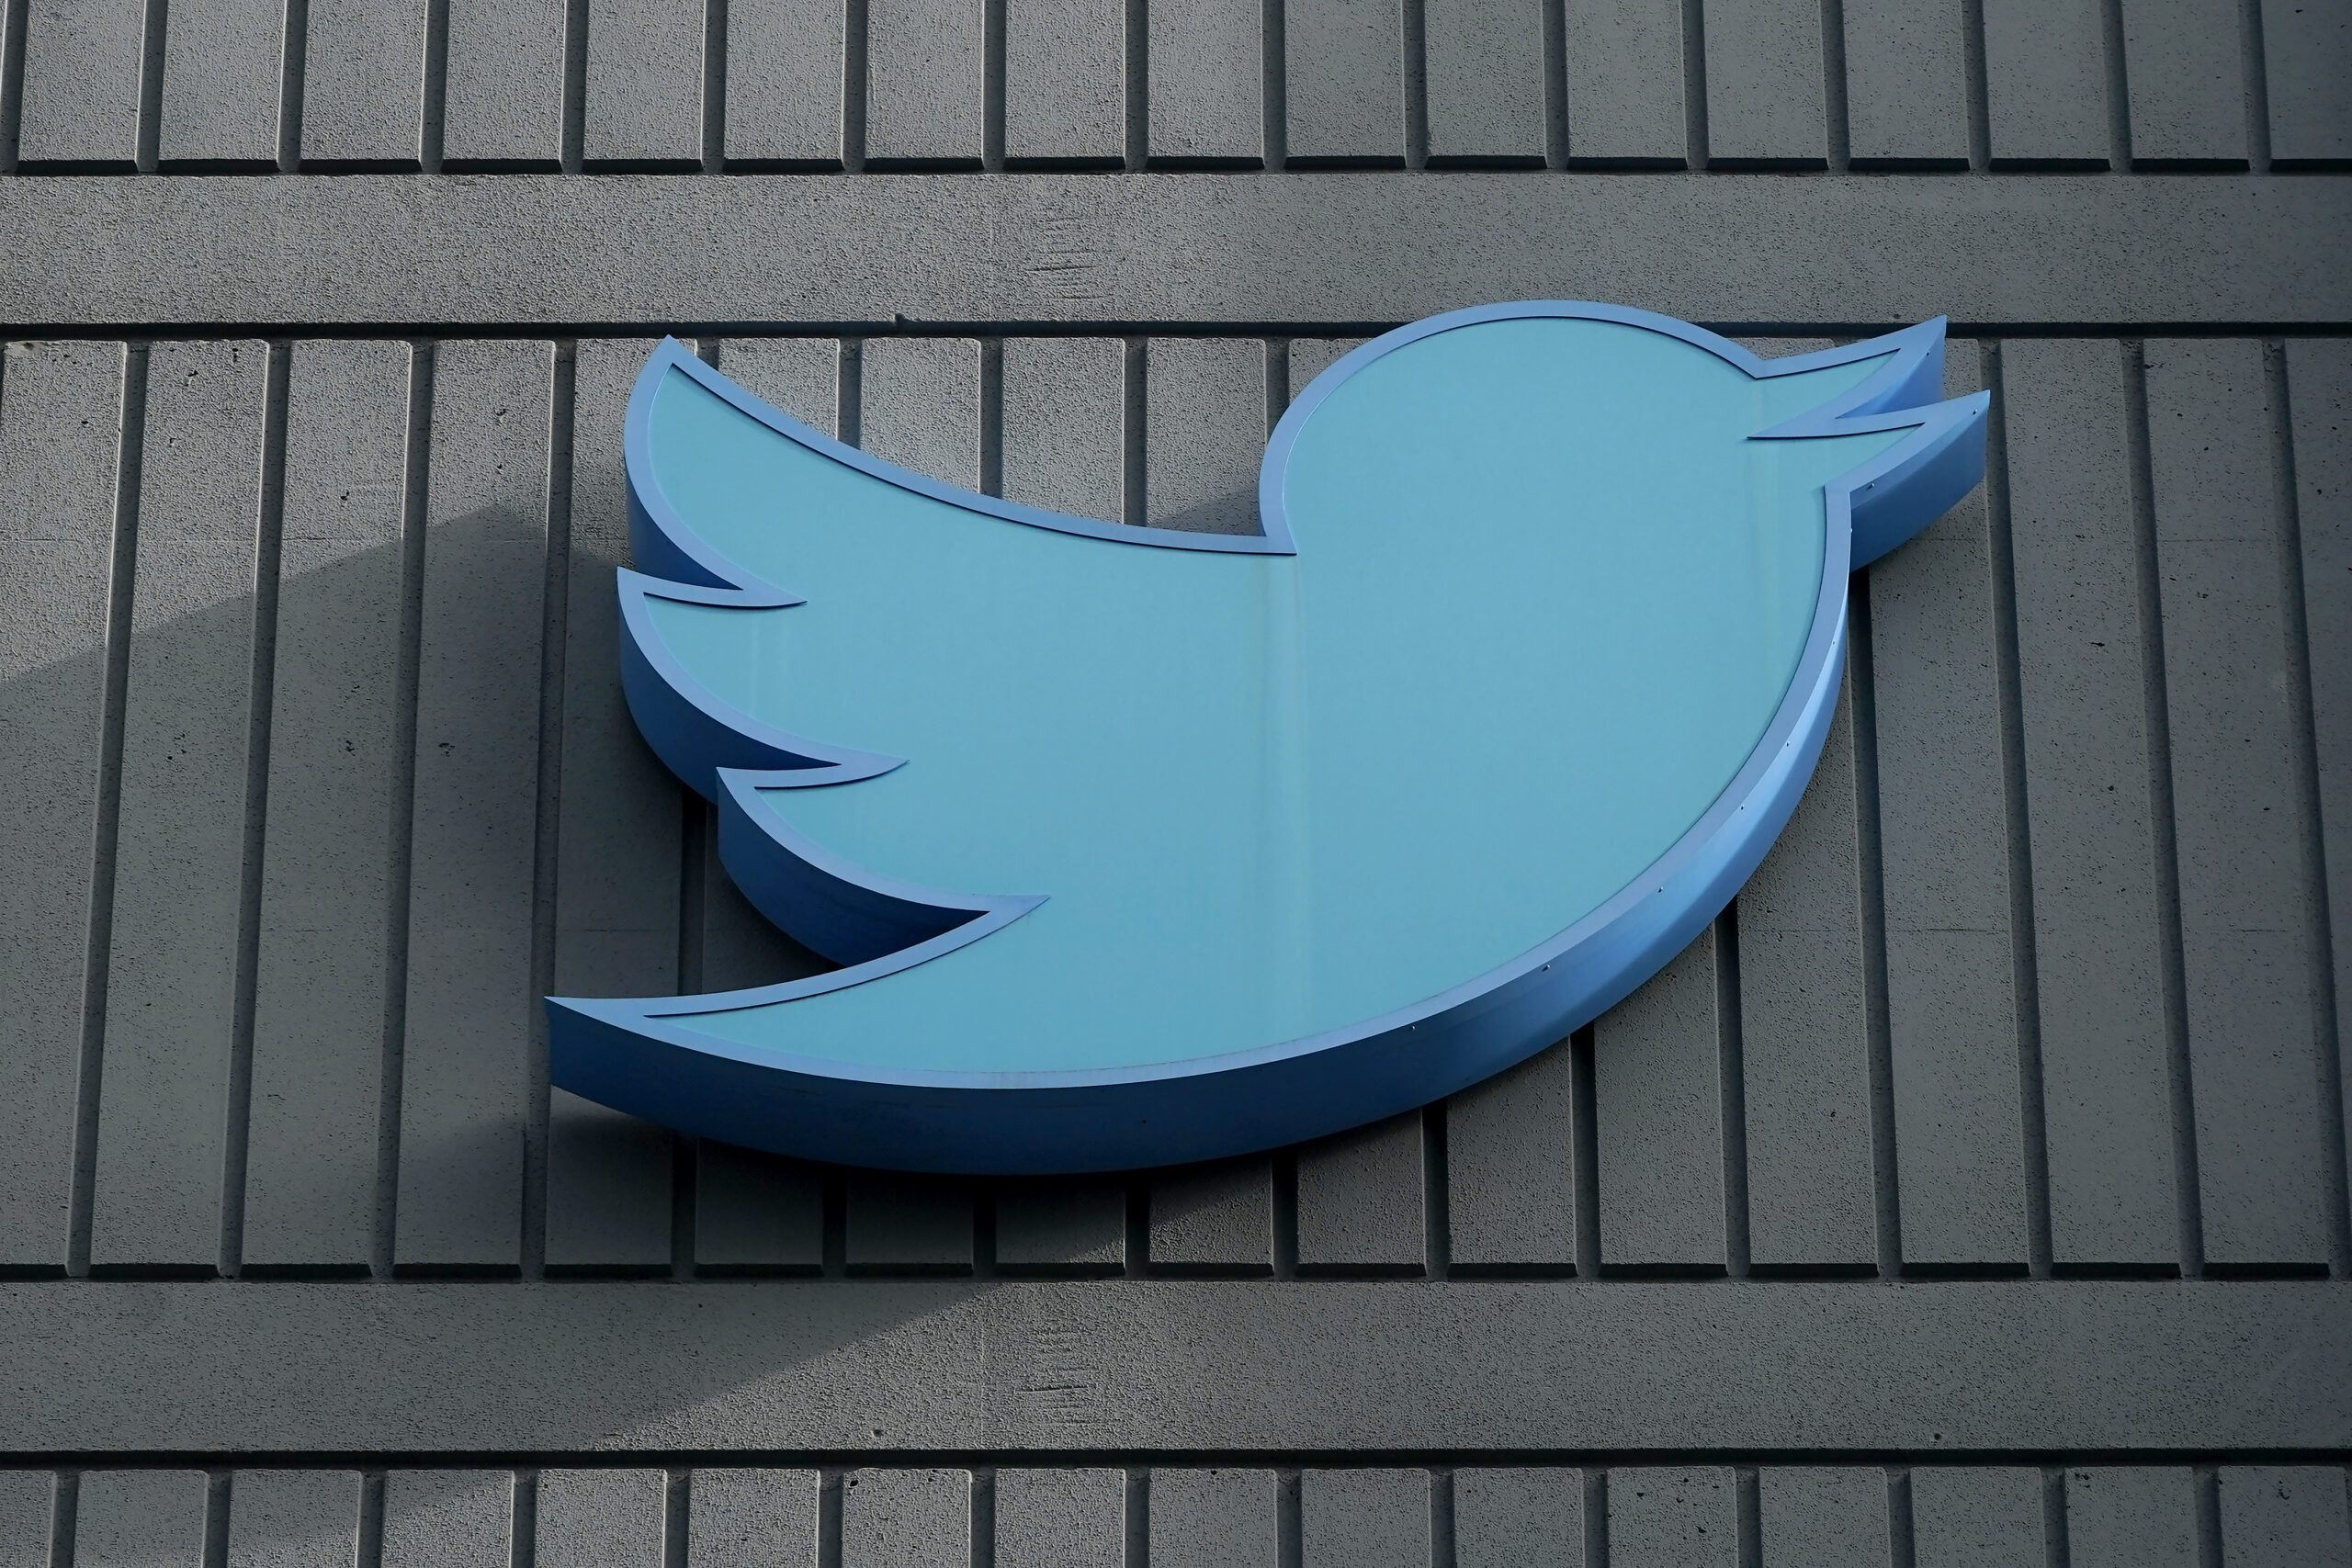 twitter-gives-peek-at-new-pay-for-verification-scheme